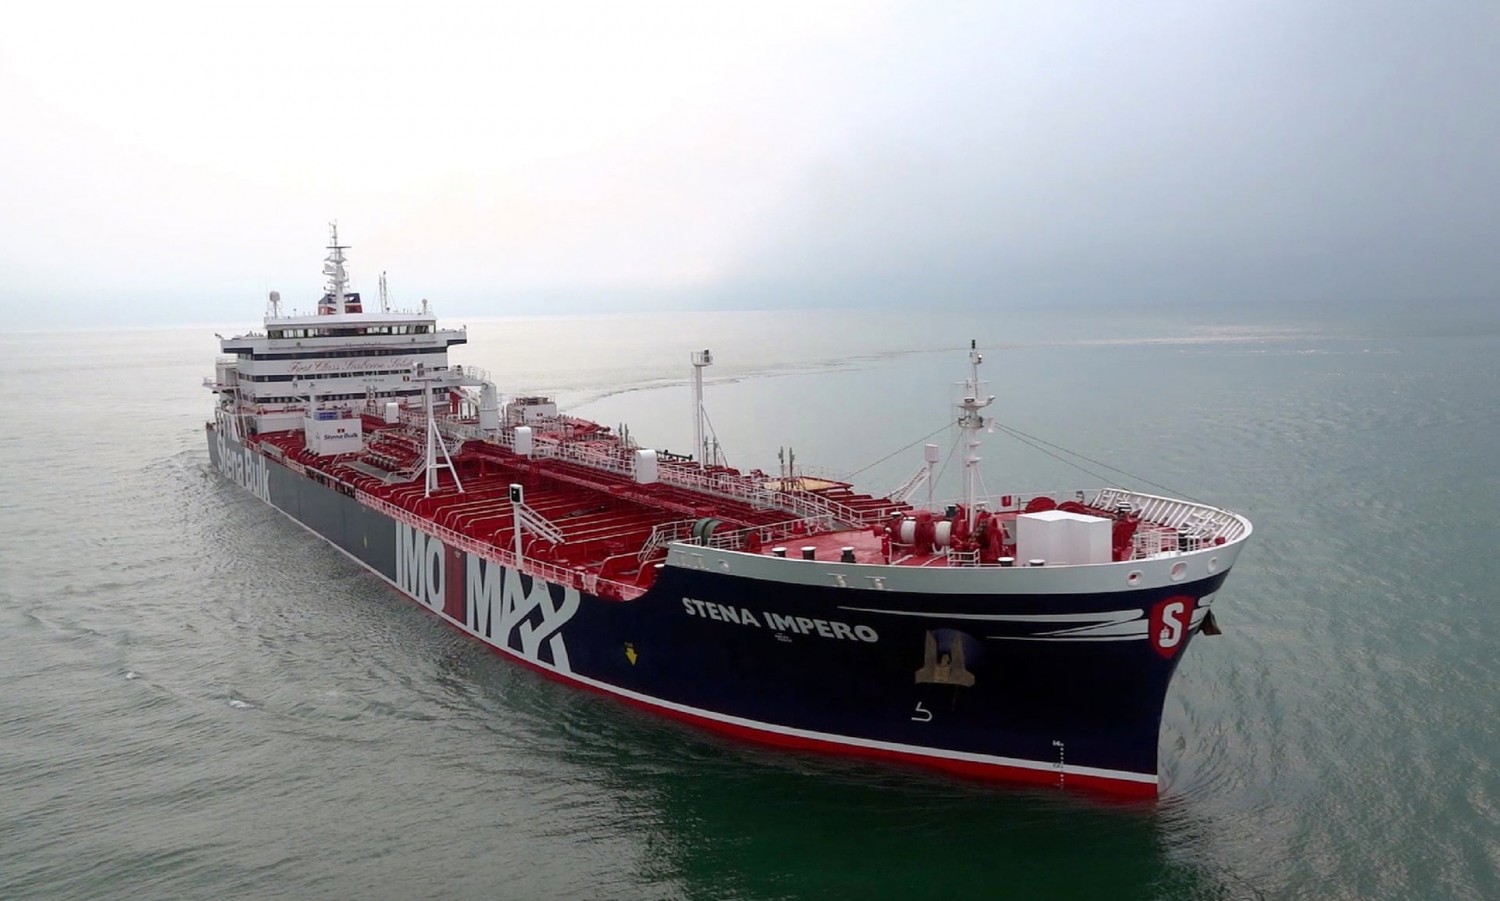 The Stena Impero ship, which might have been taken by Iranian Revolutionary Guard. Photograph: pr